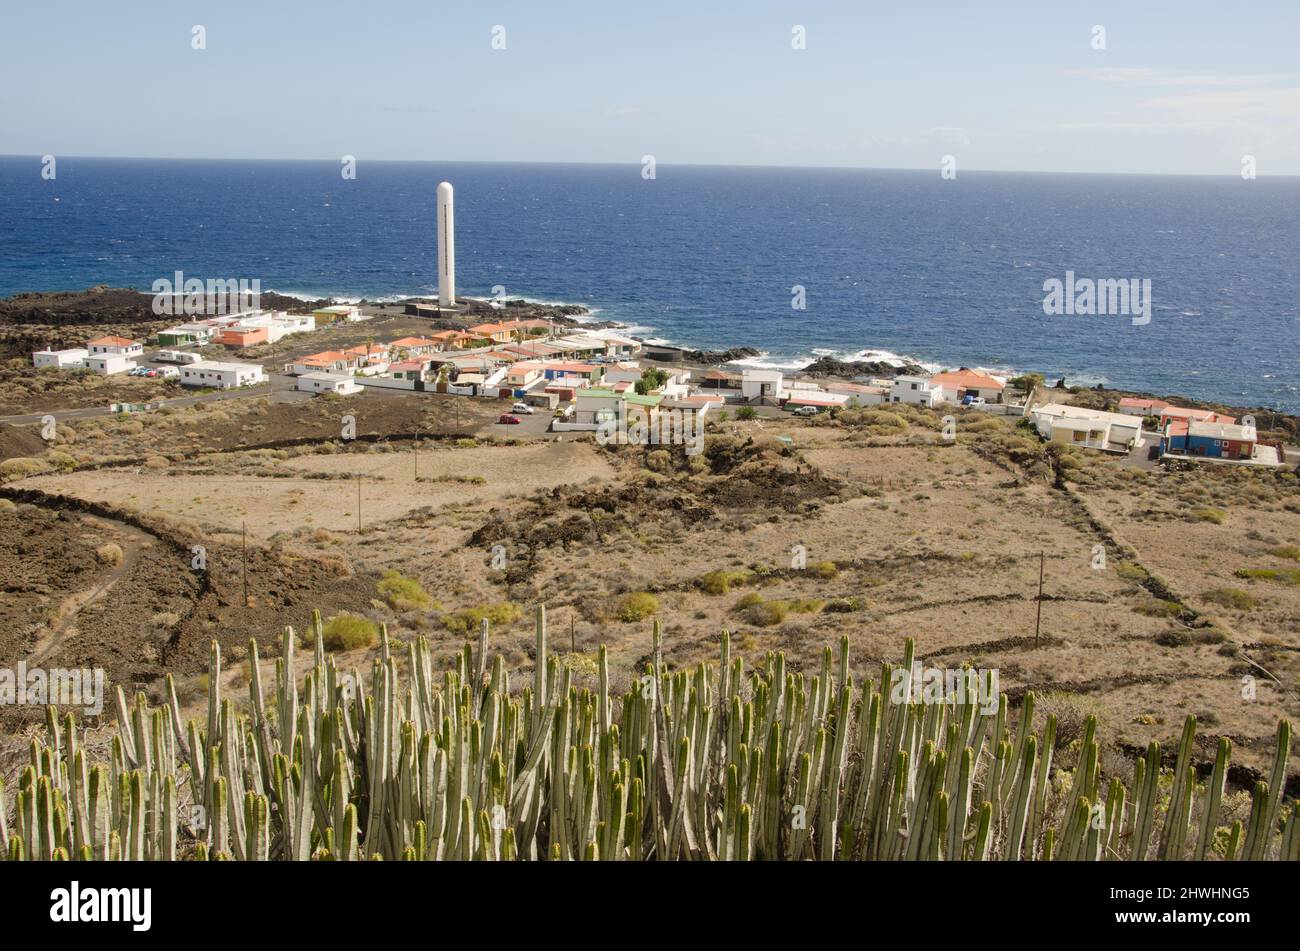 Lighthouse and village of La Salemera with a Canary Island spurge Euphorbia canariensis in the foreground. Mazo. La Palma. Canary Islands. Spain. Stock Photo